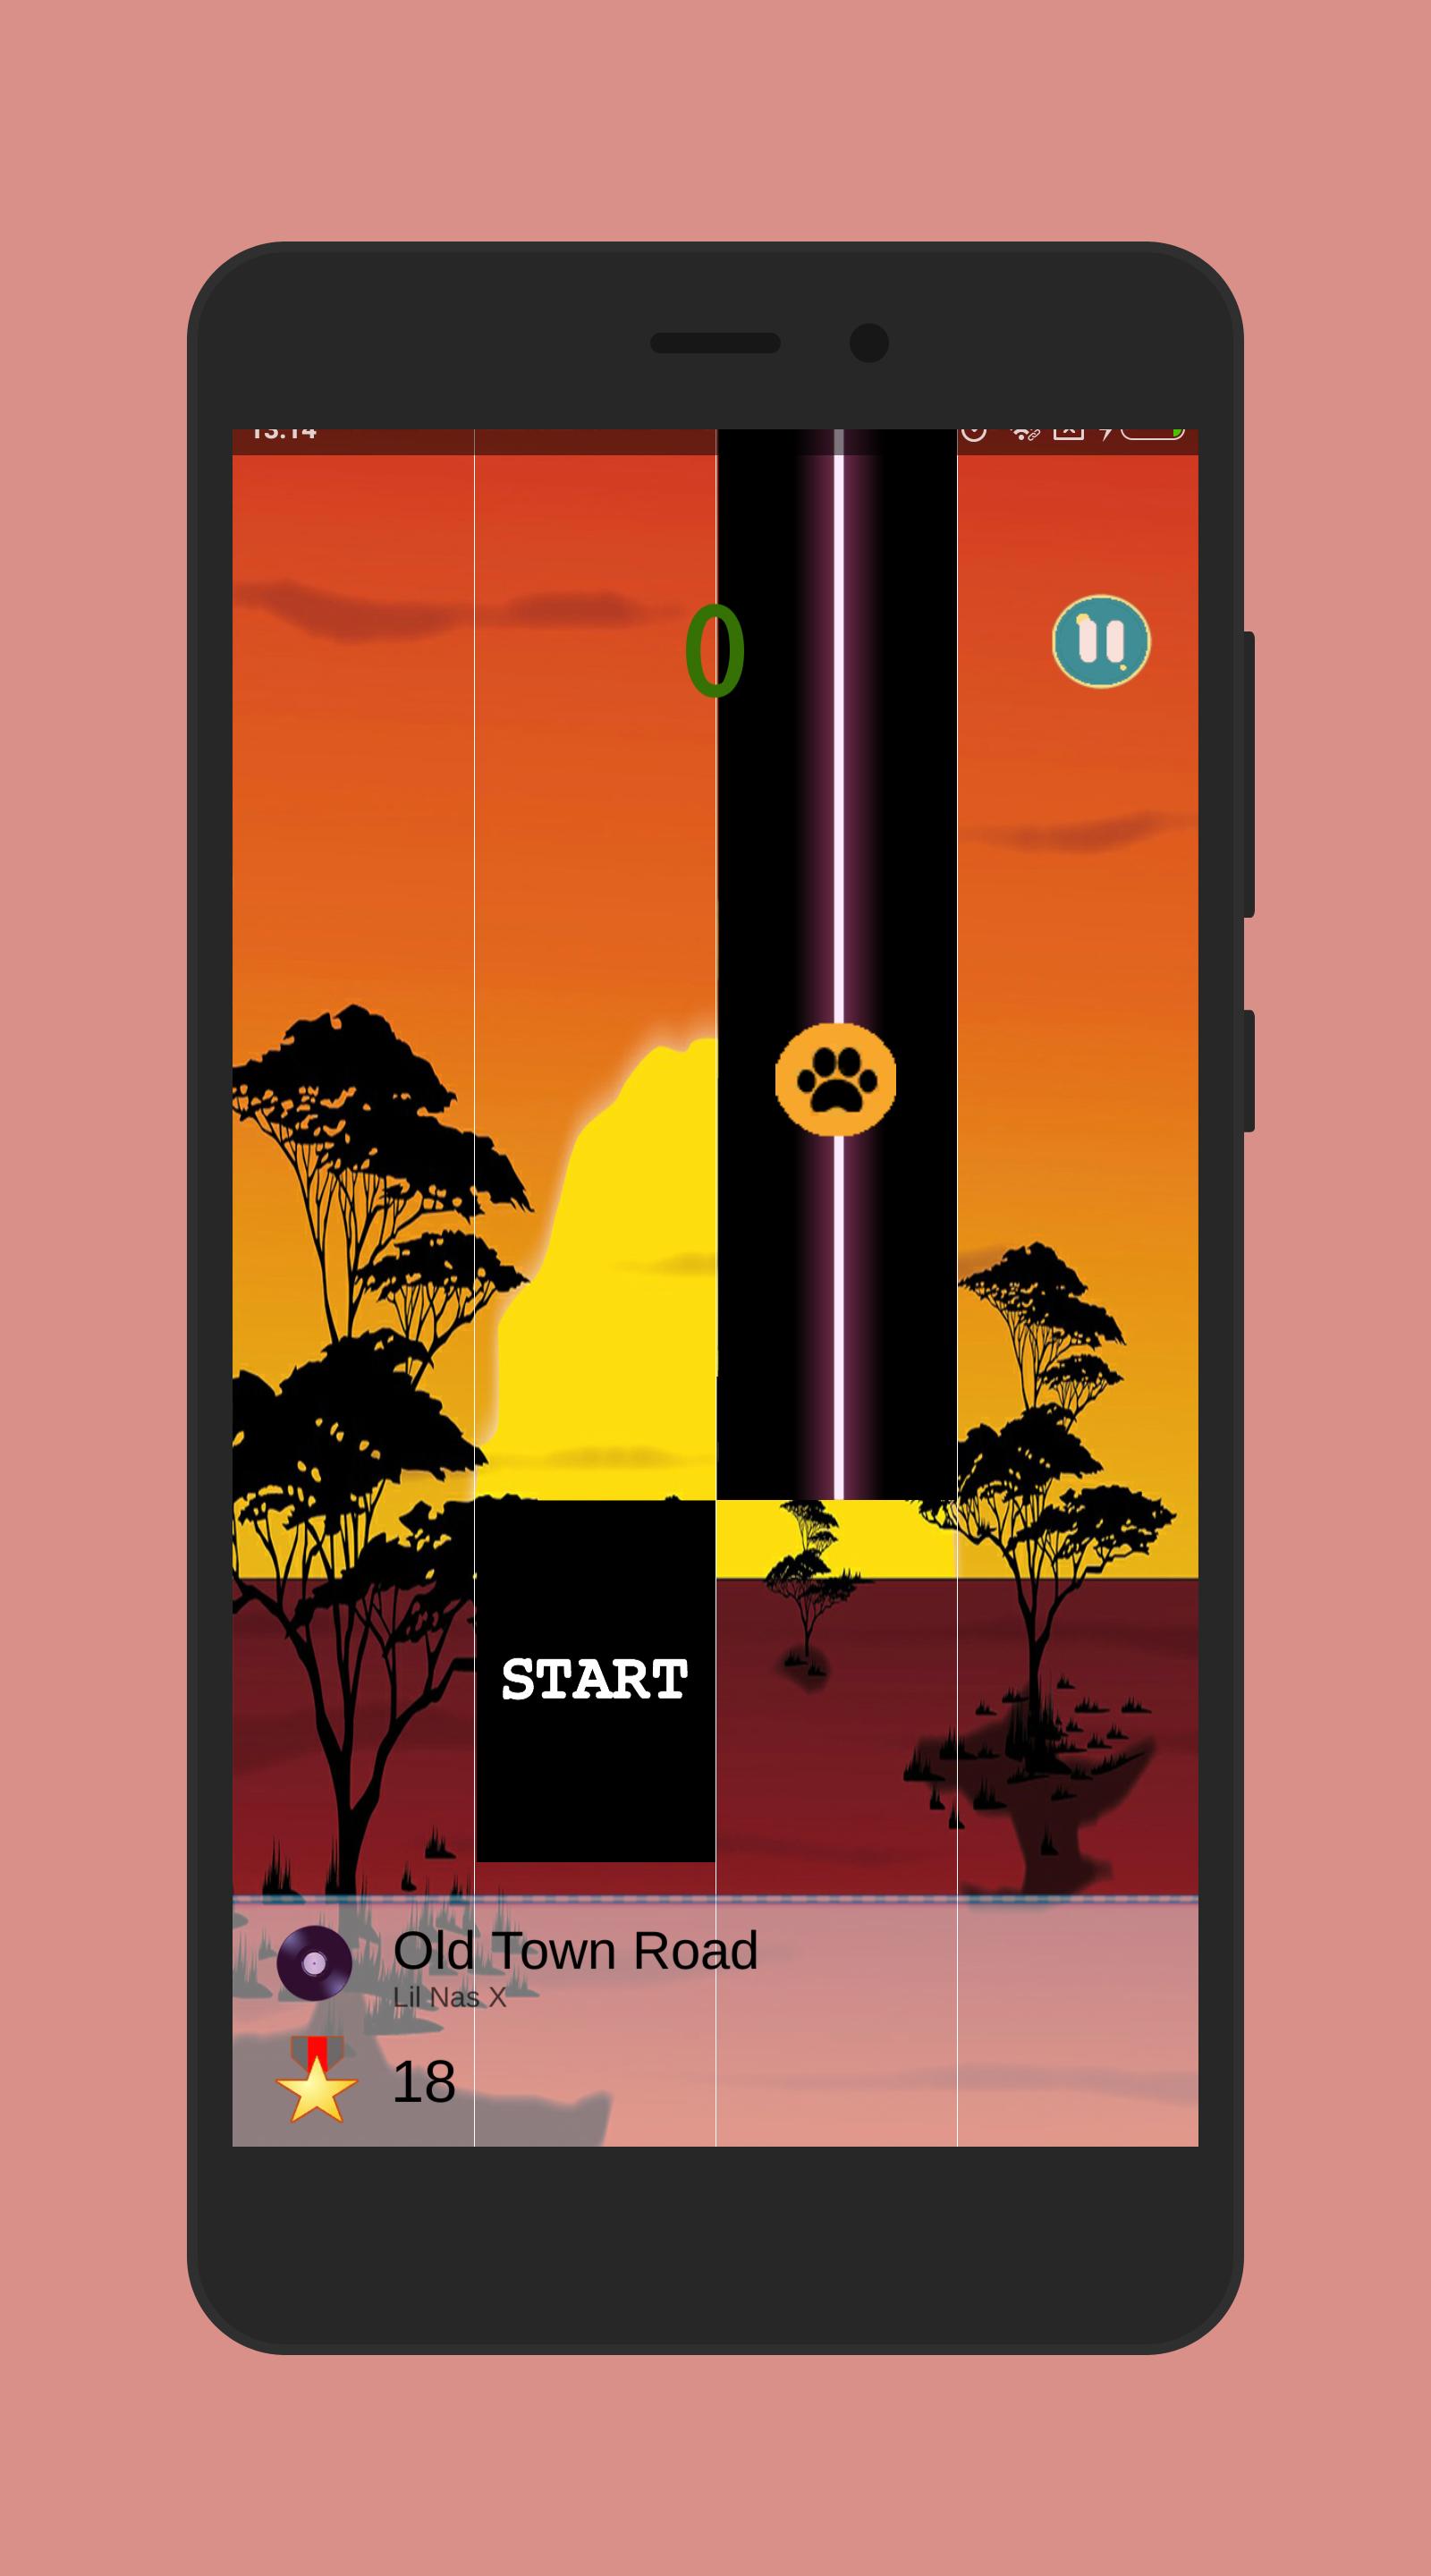 Old Town Road Lil Nas X Piano Tiles For Android Apk Download